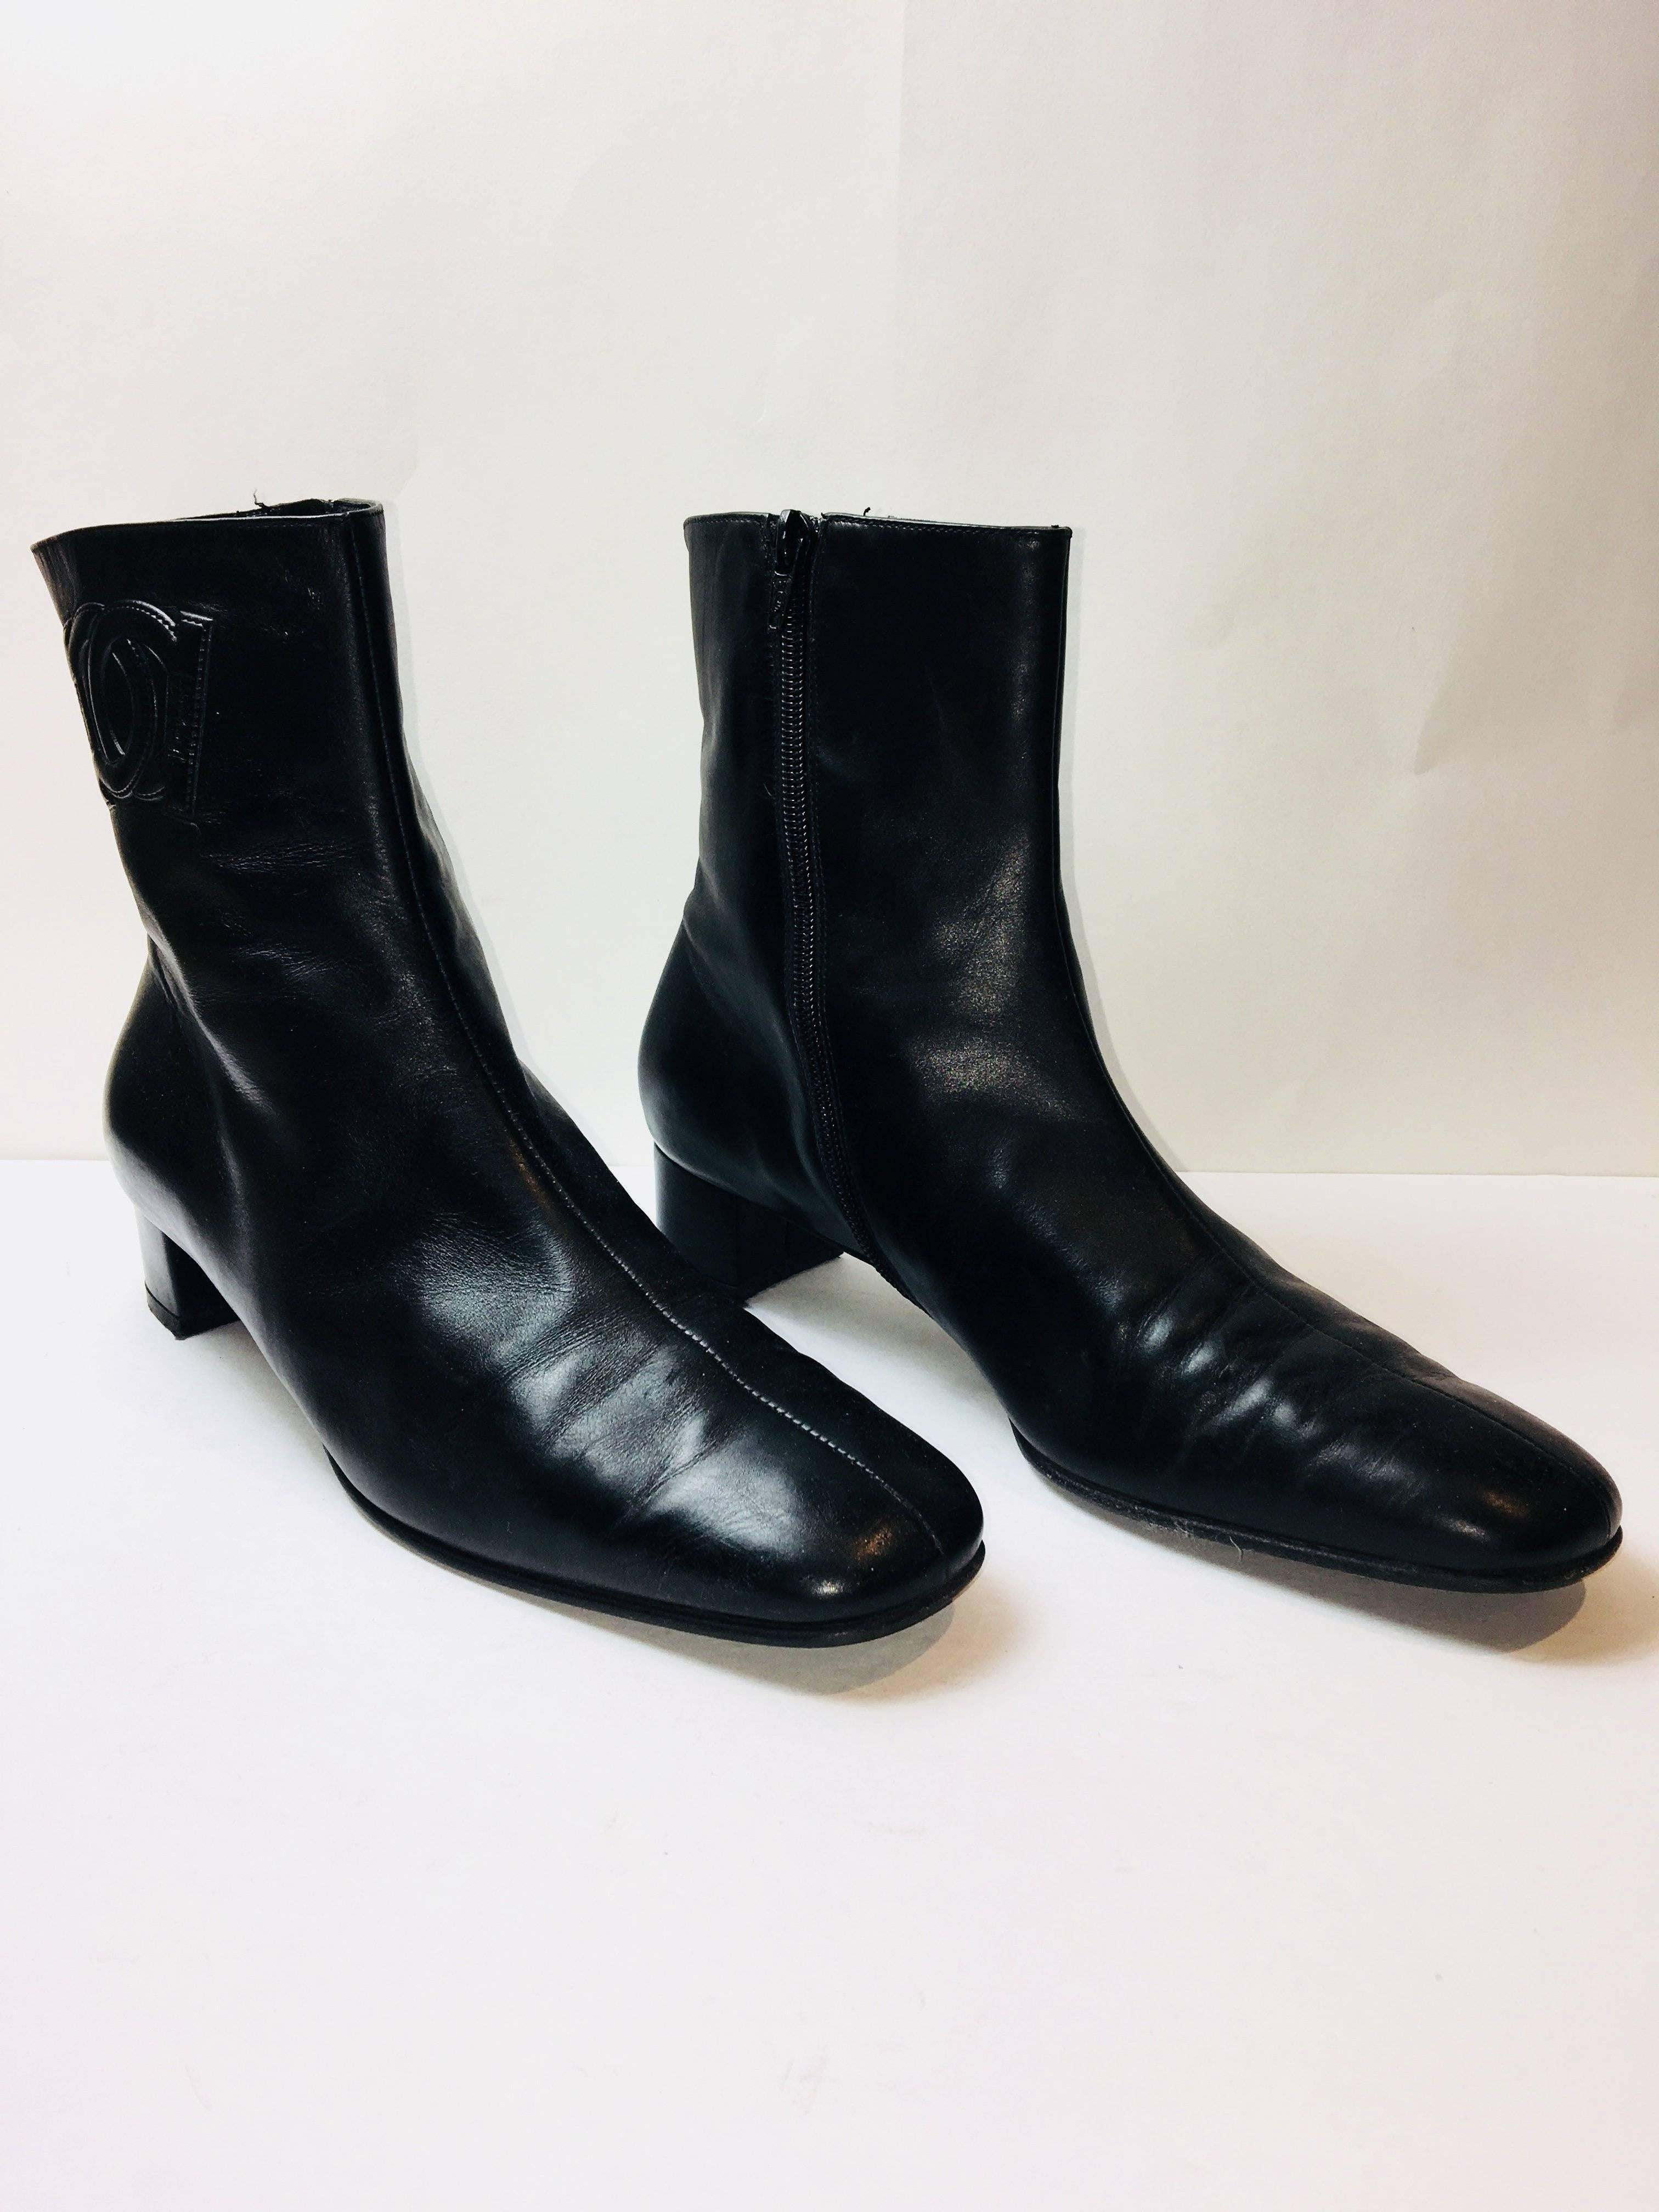 Salvatore Ferragamo Black Leather Ankle Boot with Side Zippers and Logos at Ankles.